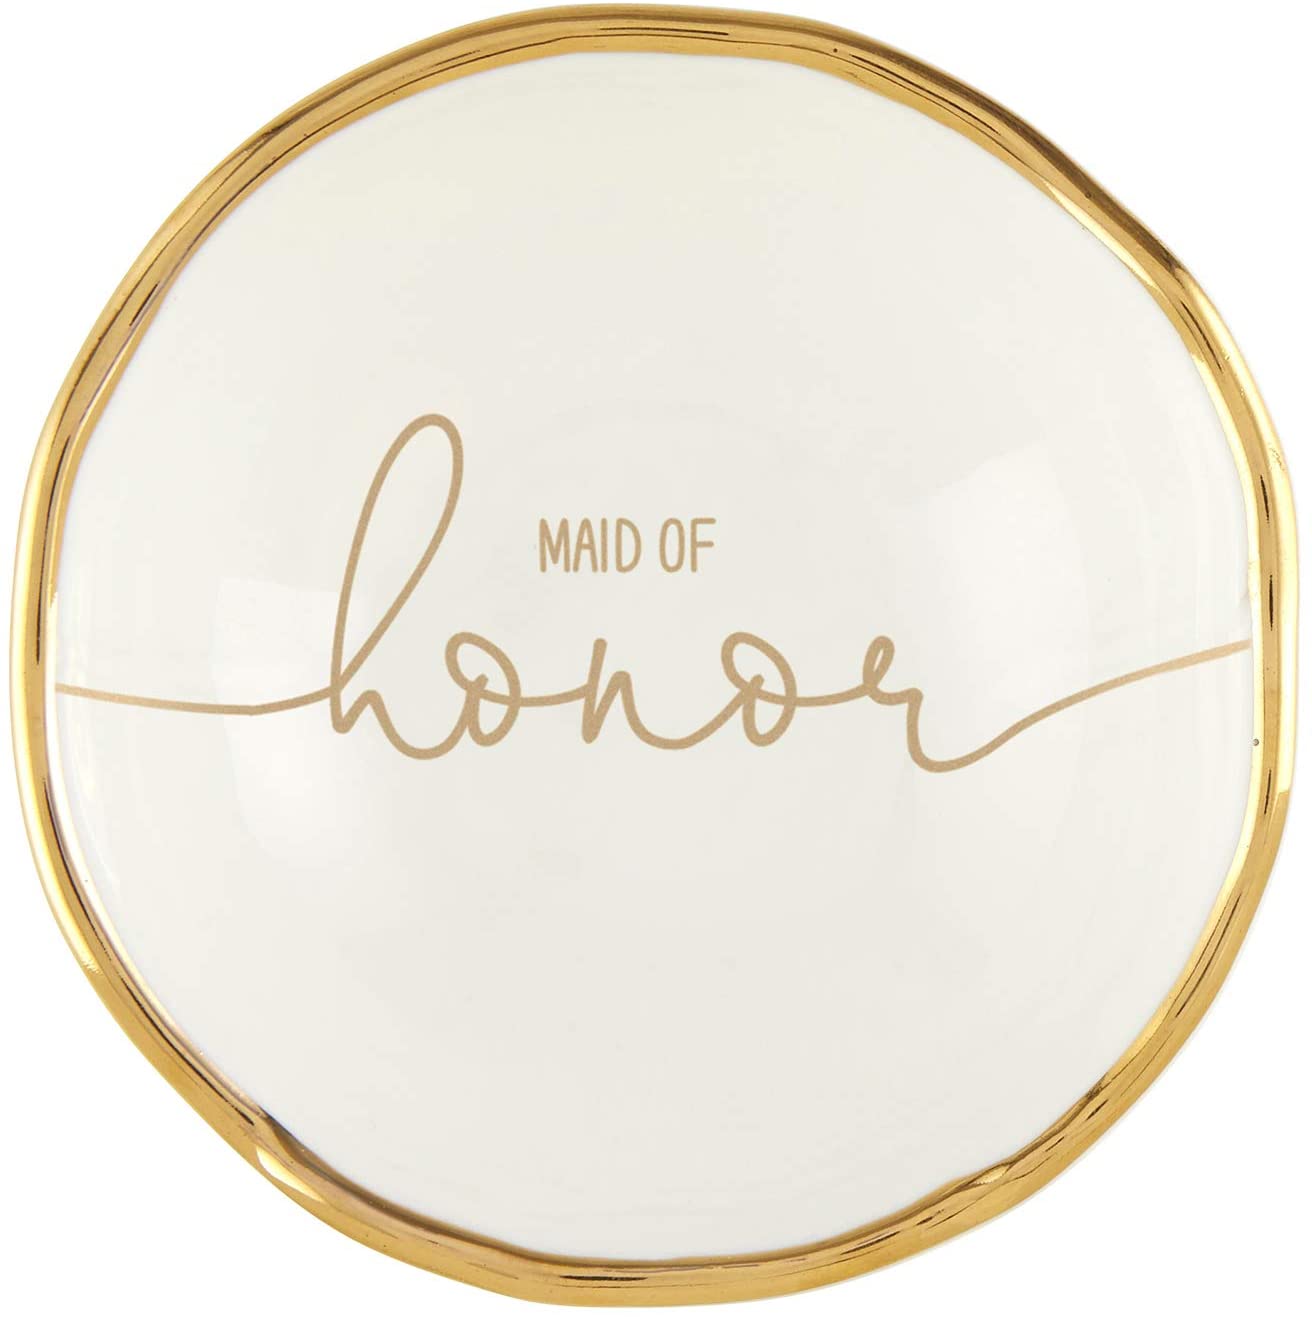 maid-of-honor-gifts-ring-dish